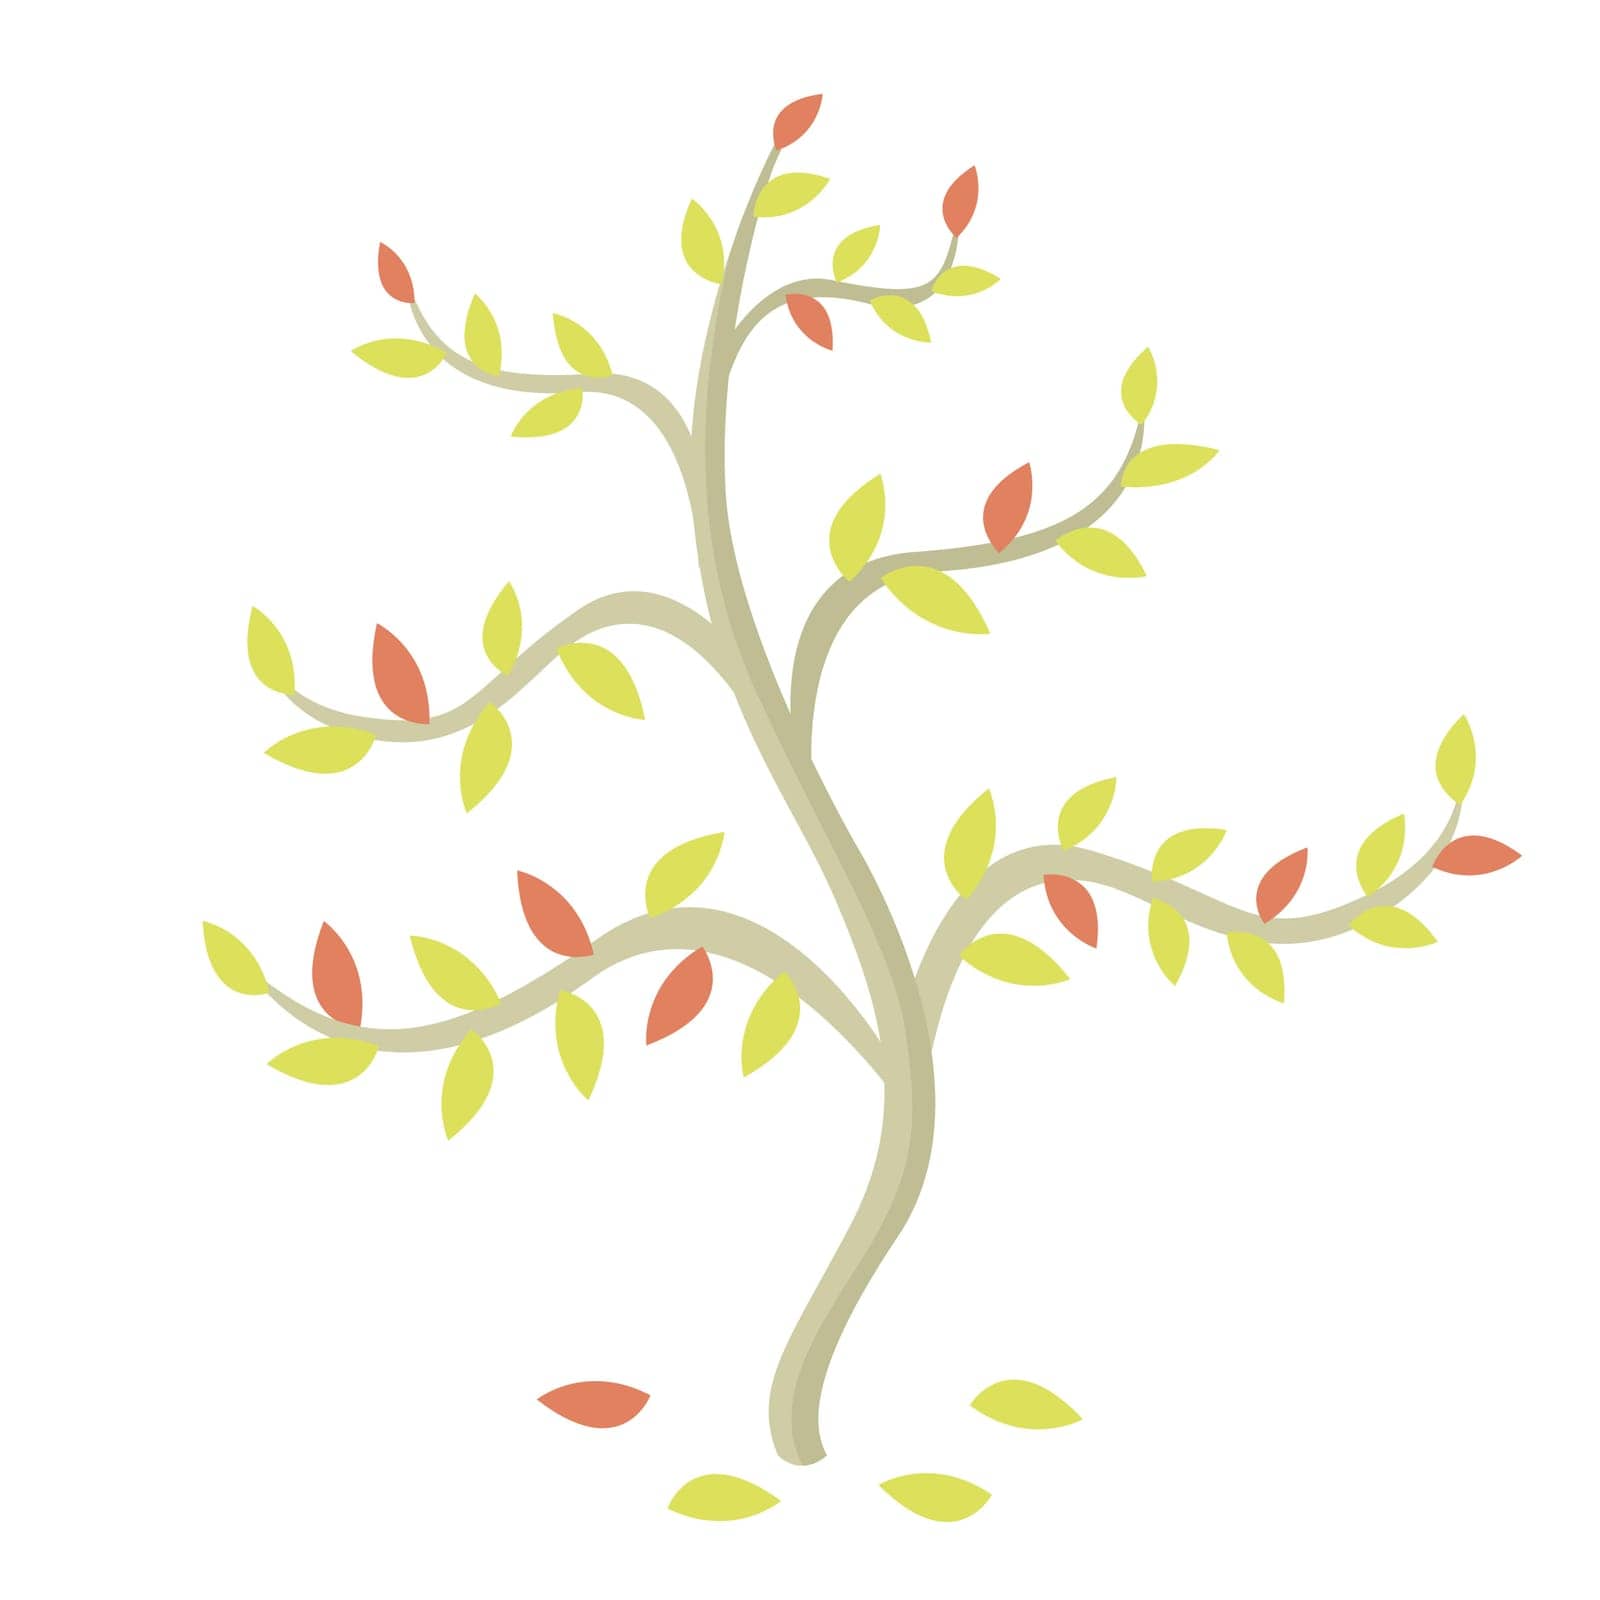 Minimalist flat autumn tree with yellow and red little leaves on white background. Organic forest concept. Vector simple illustration. by annagraphics